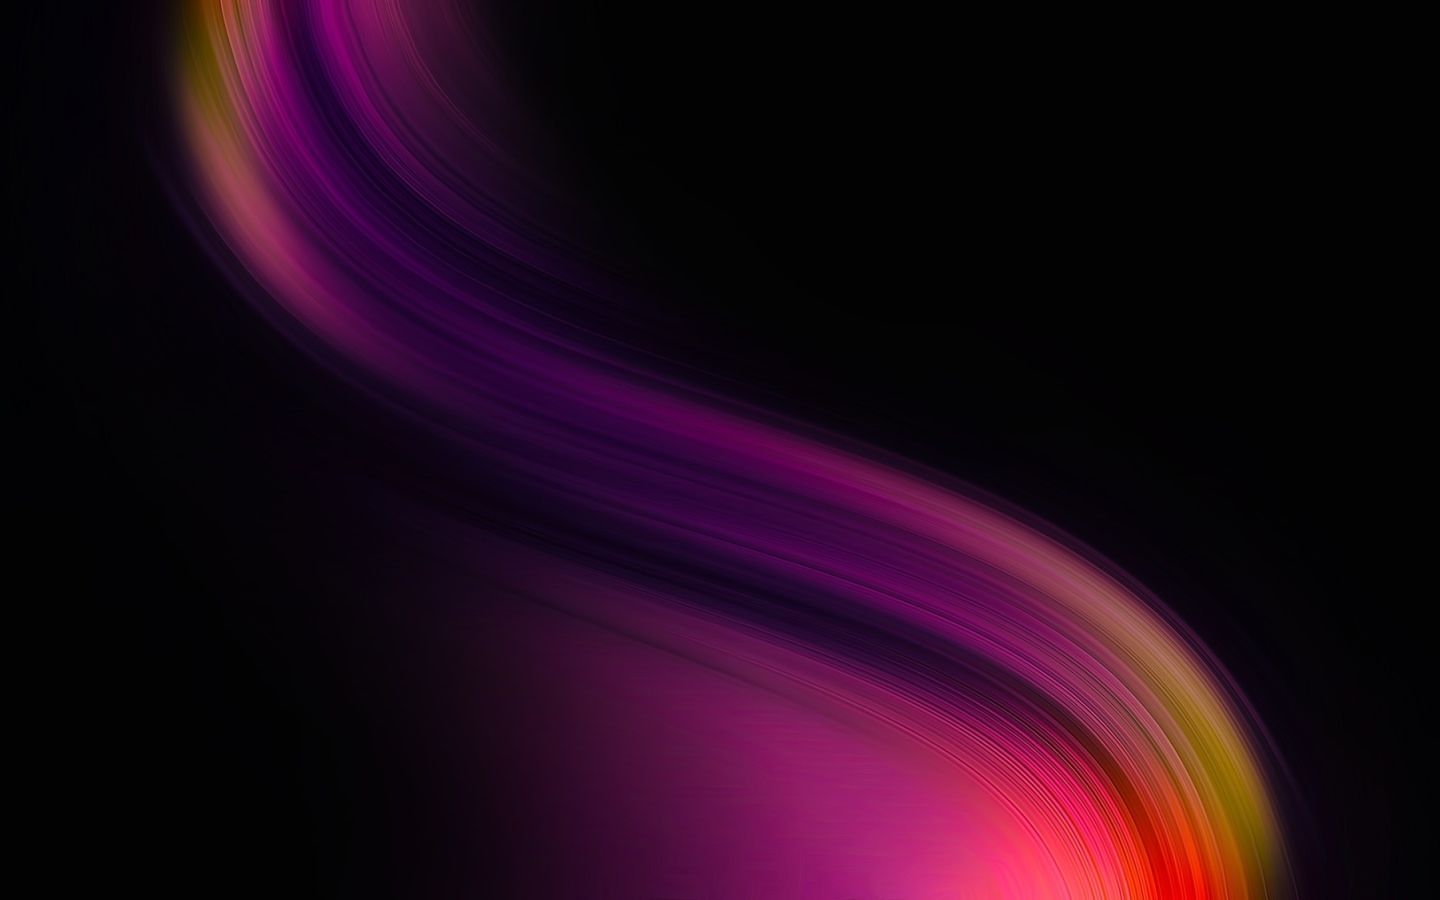 Amoled Colorful Wave 1440x900 Wallpaper, HD Artist 4K Wallpaper, Image, Photo and Background